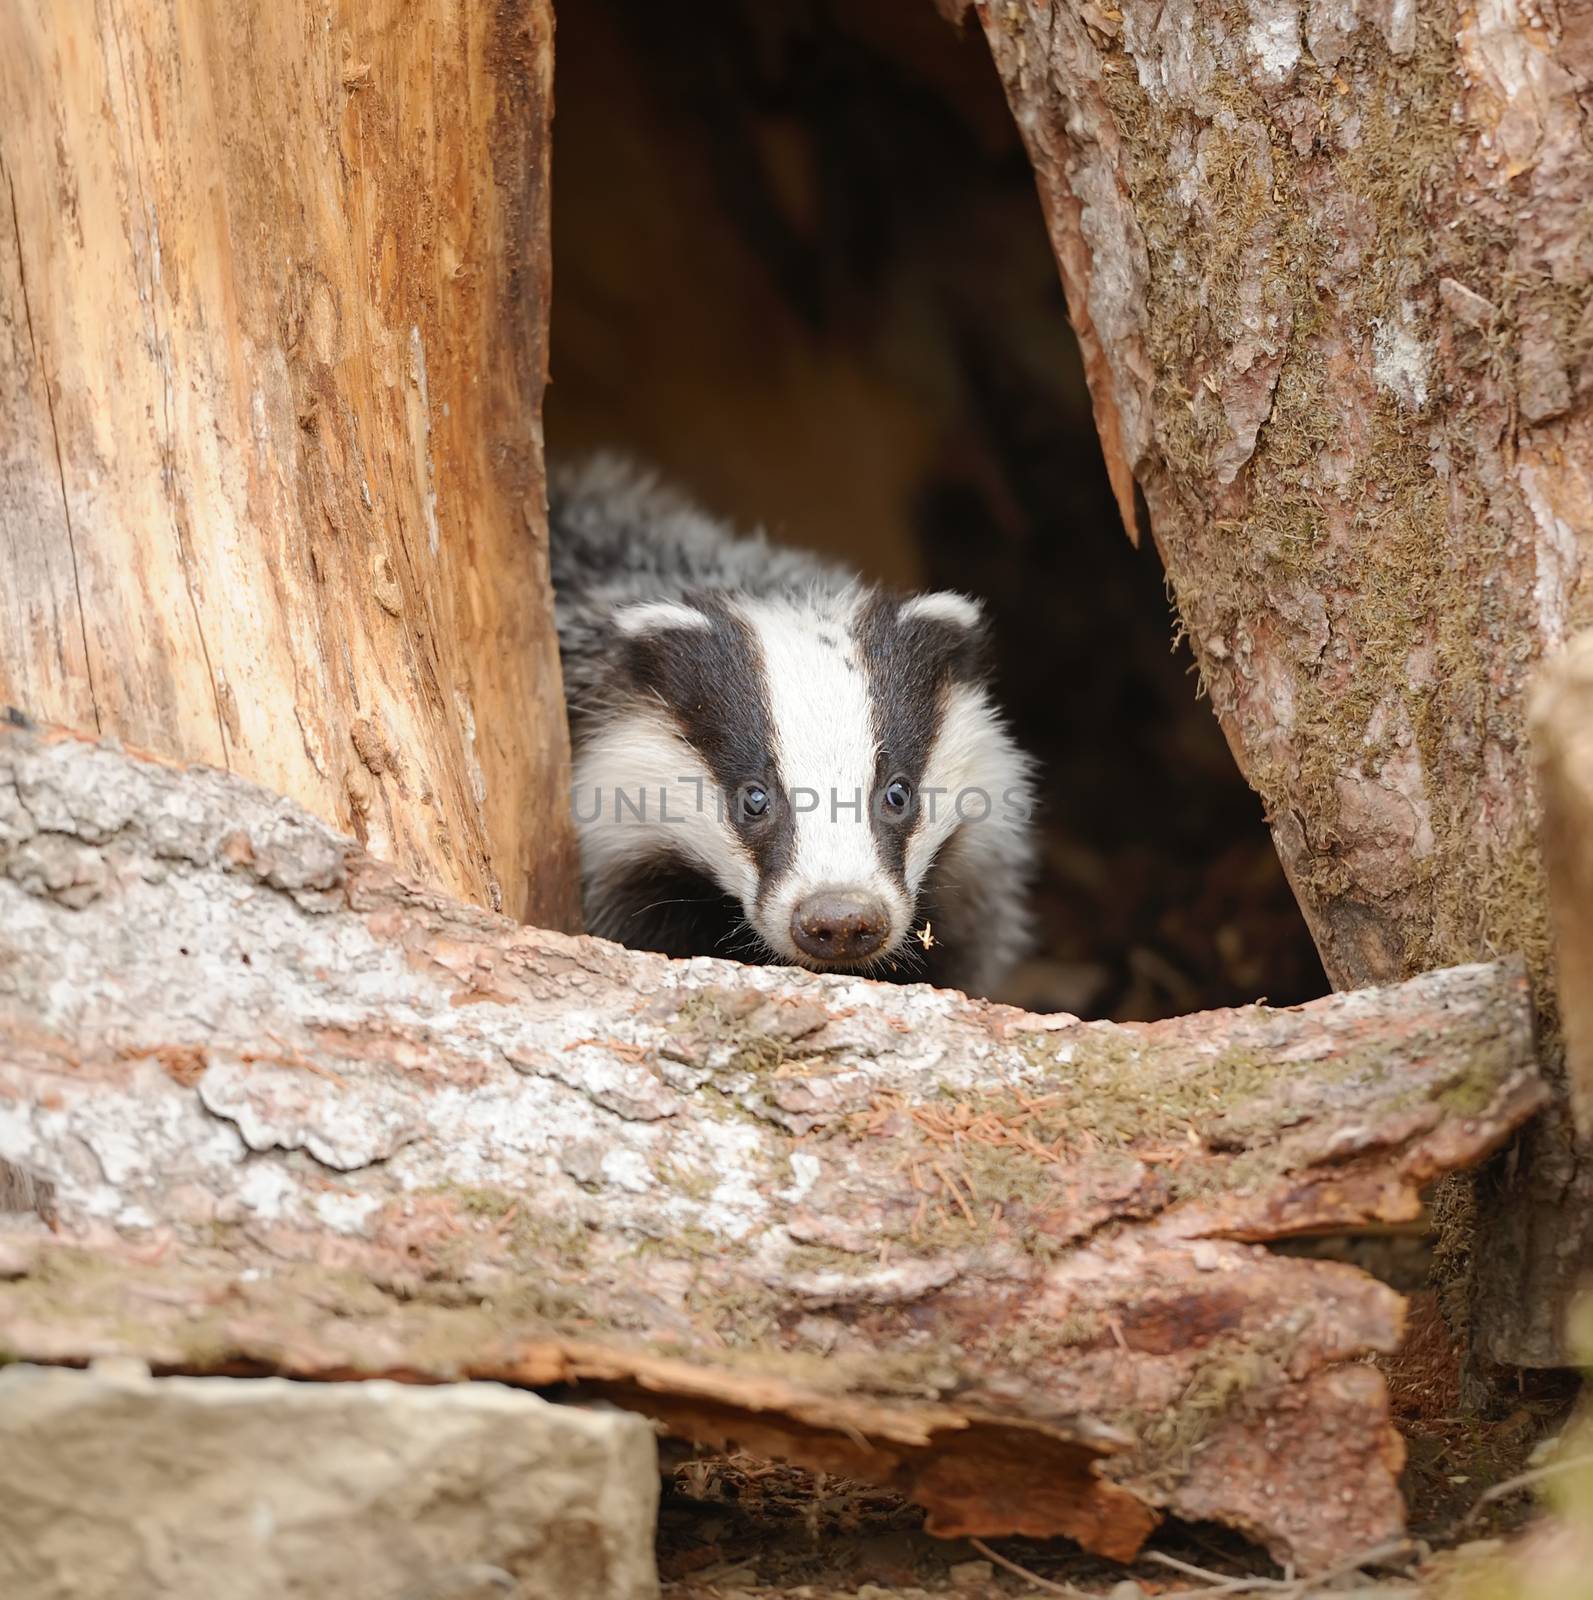 Badger near its burrow in the summer forest